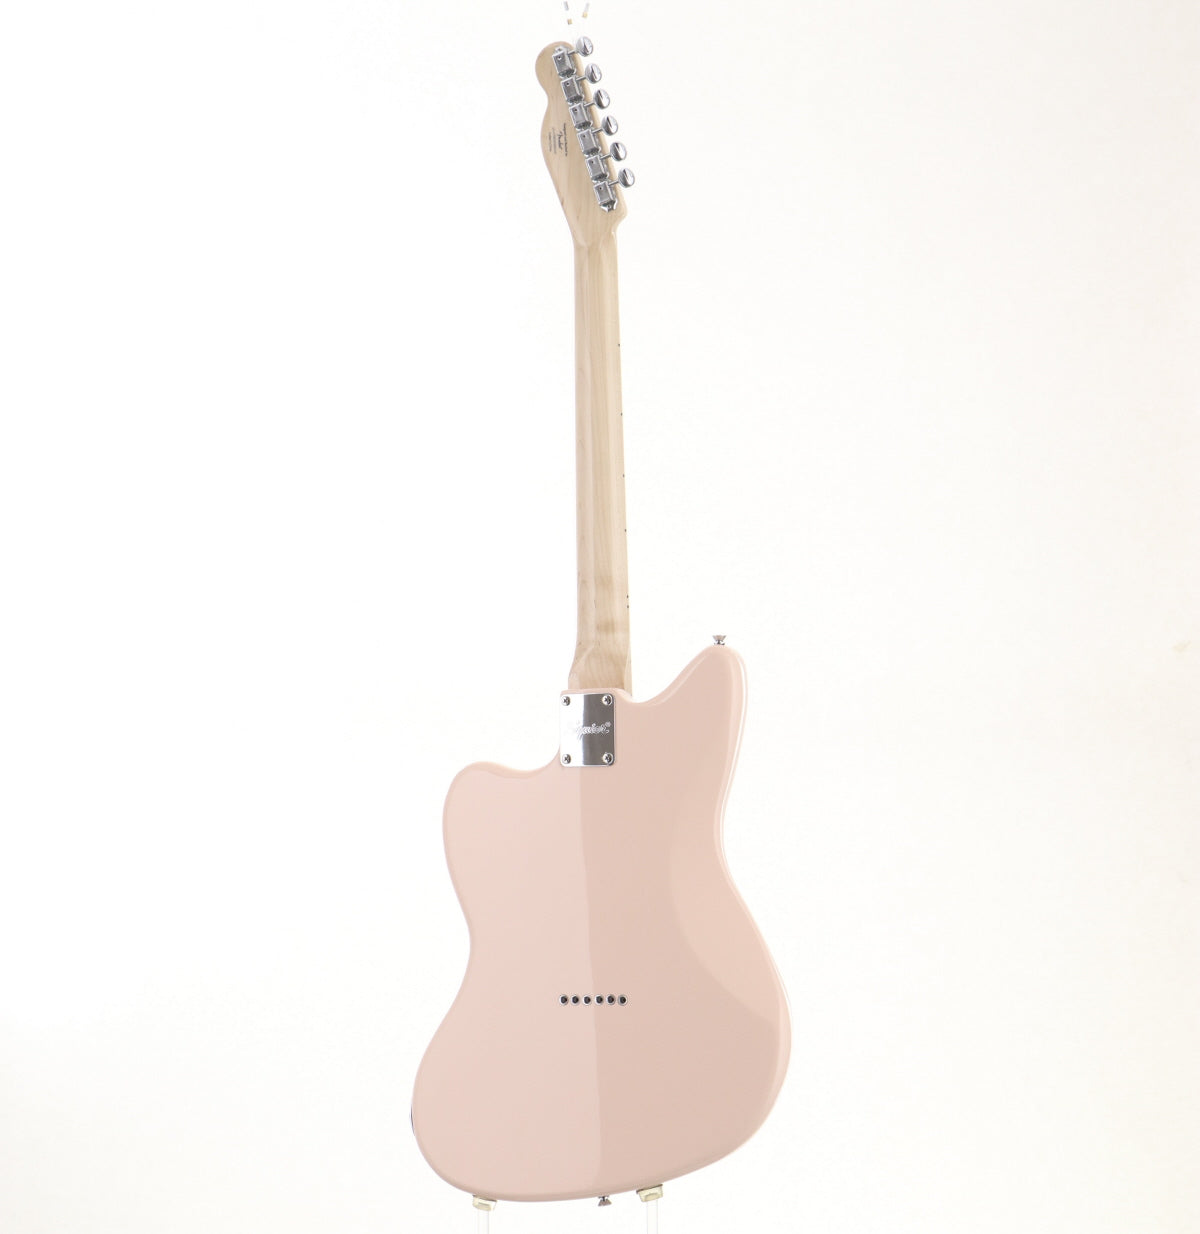 [SN CYKF21008168] USED SQUIER / Paranormal Offset Telecaster Shell Pink [03]